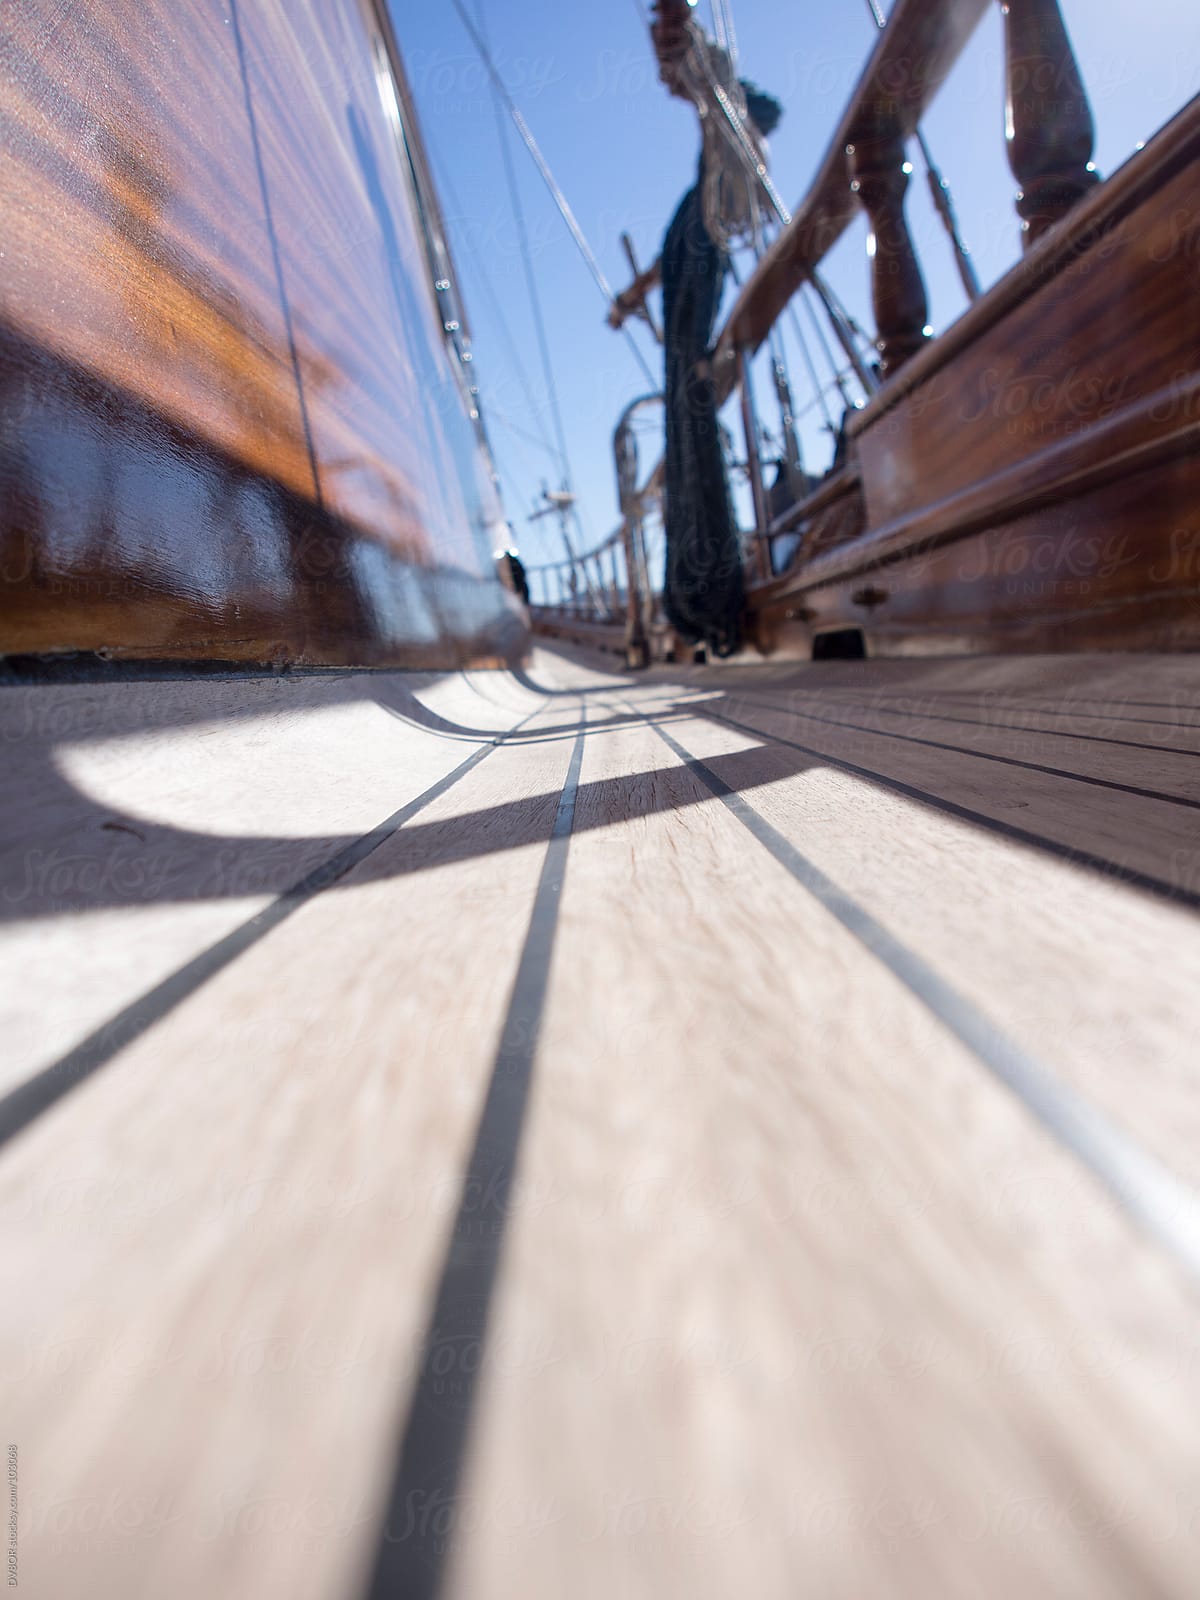 View of a Traditional Turkish Gulet boat deck